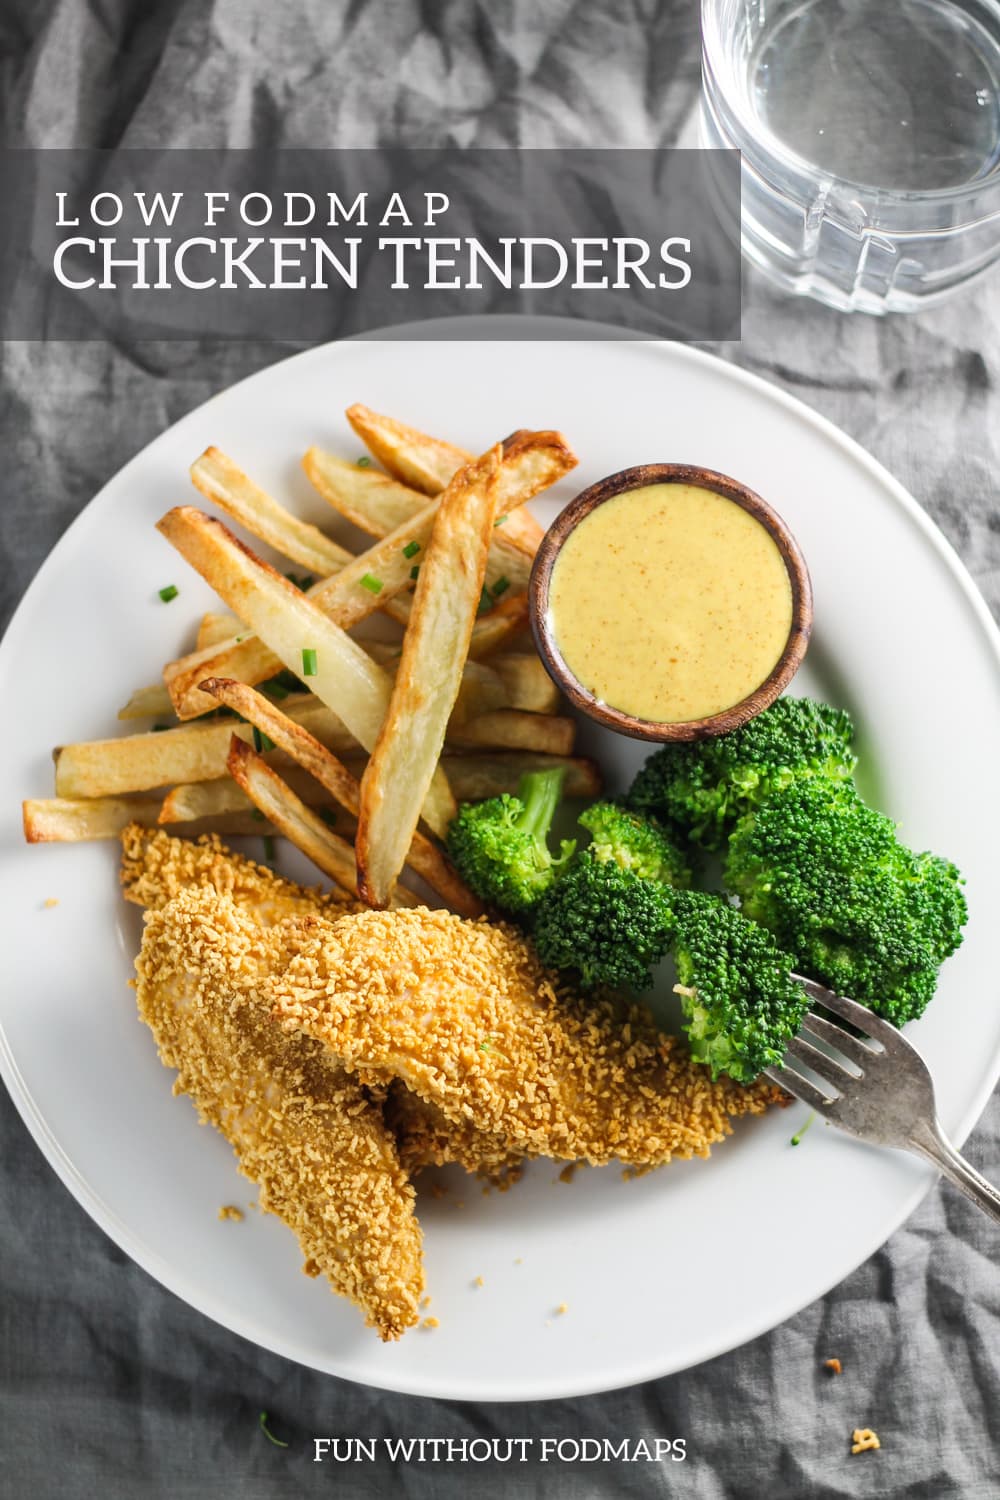 A plate filled with crispy chicken tenders, steamed broccoli, baked fries, and creamy maple mustard. A text overlay reads "Low FODAMP Chicken Tenders."